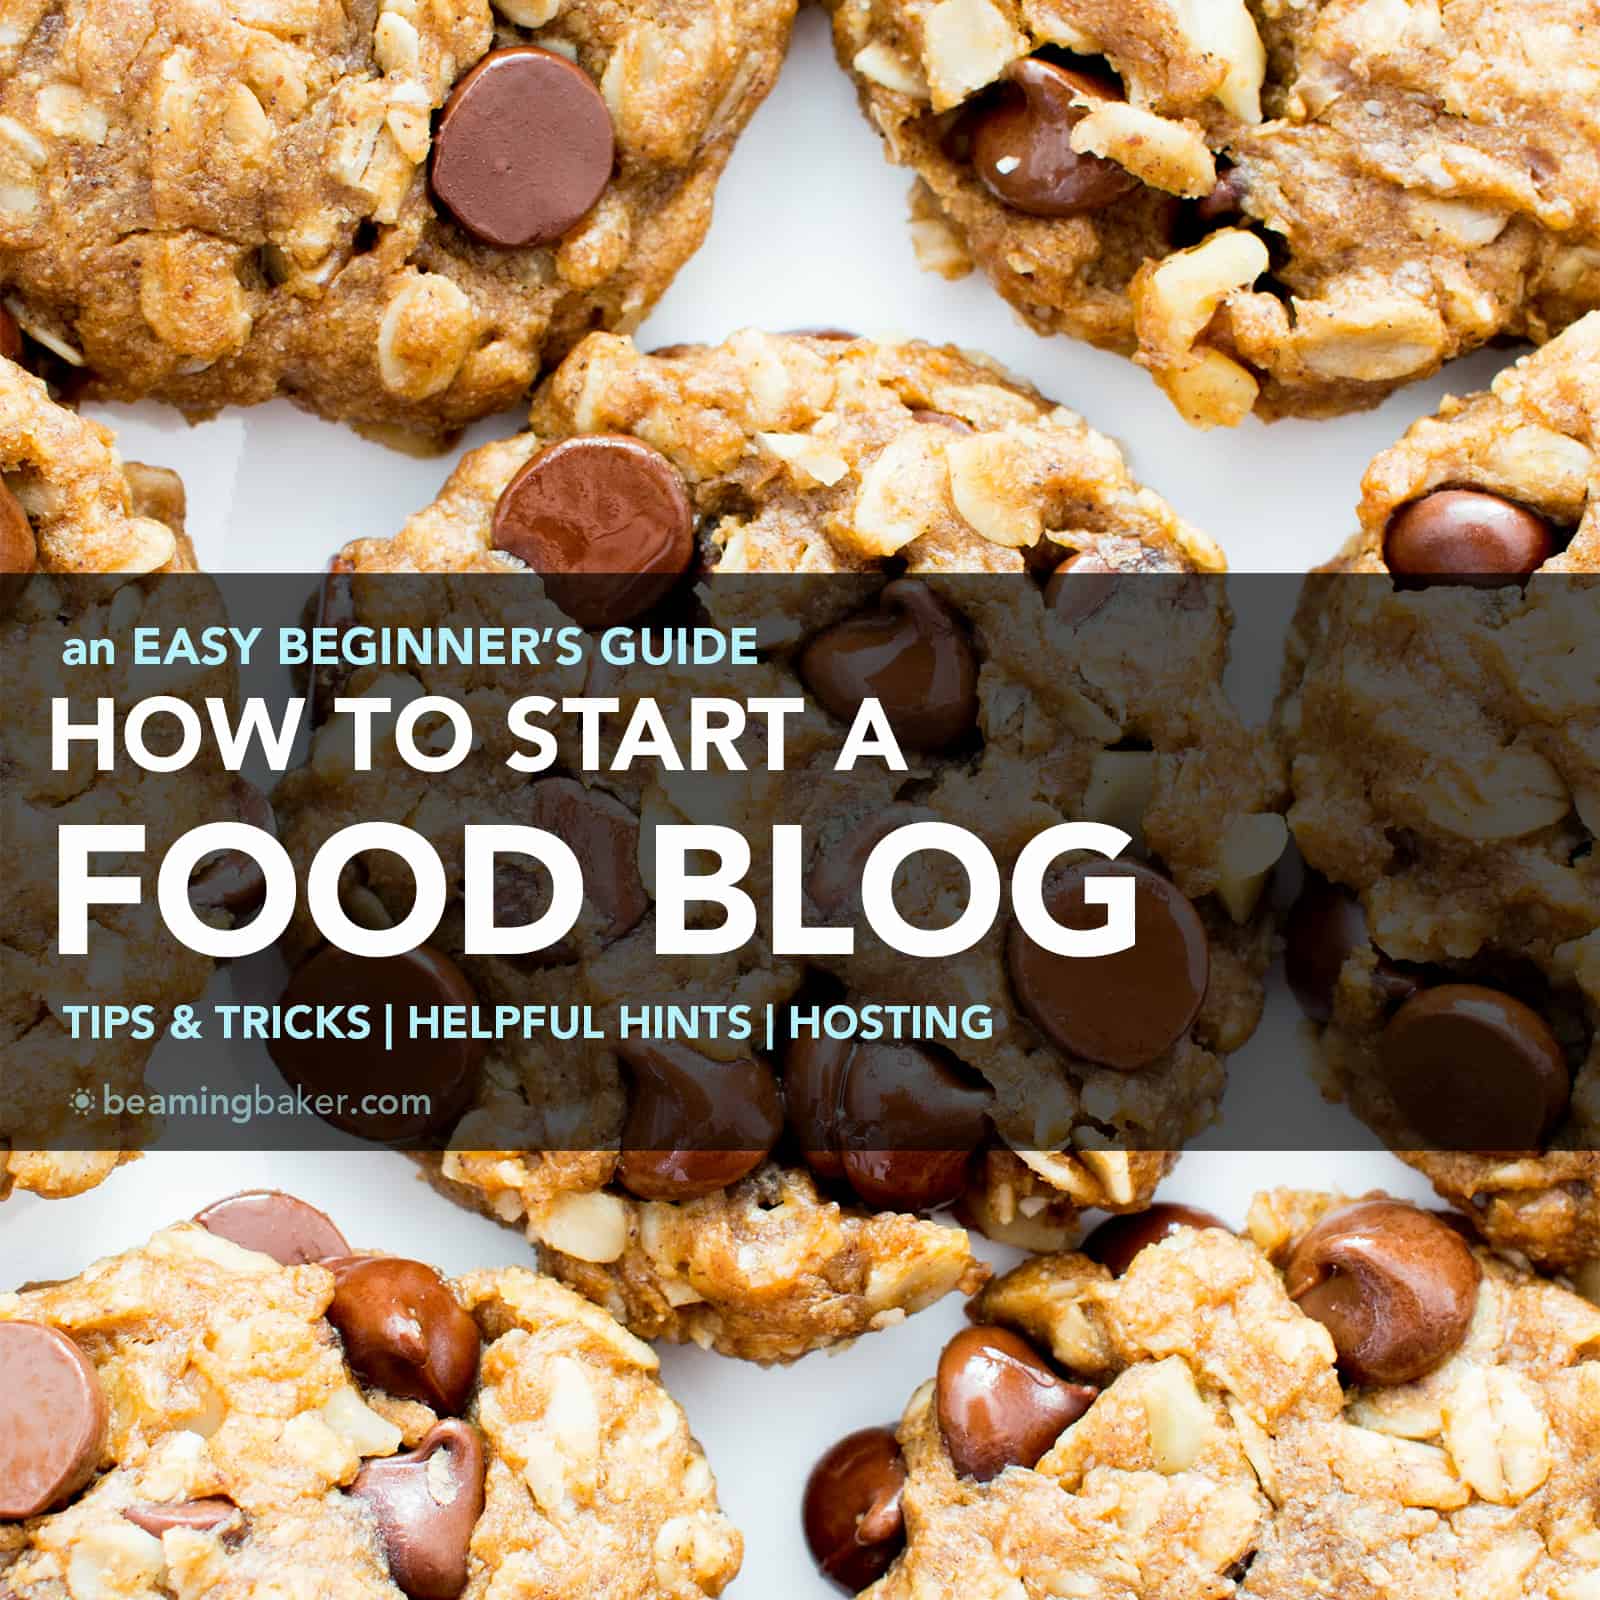 How to Start a Food Blog: an Easy Beginner’s Guide